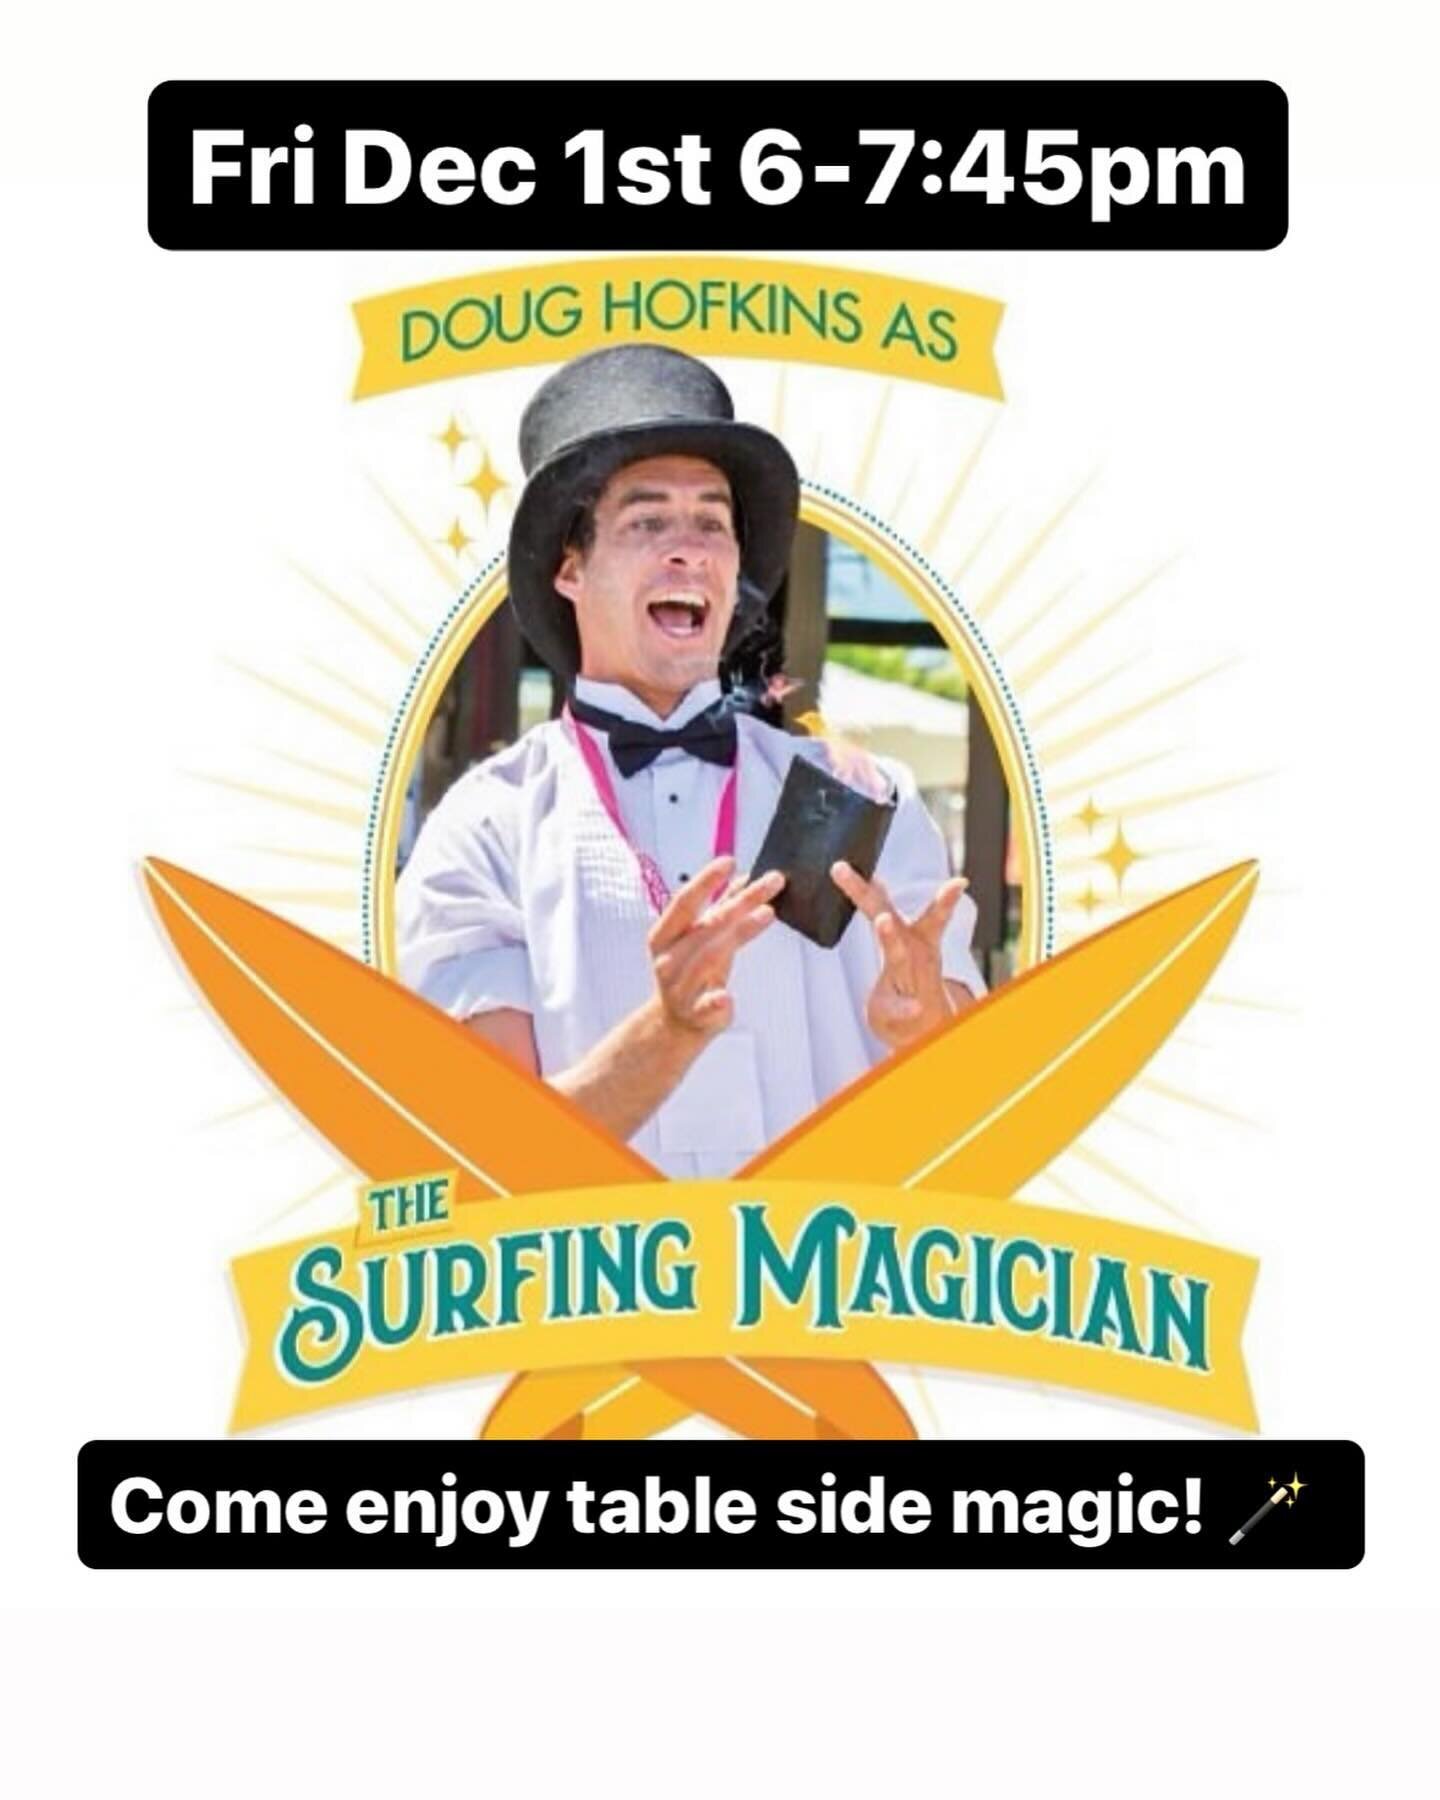 Tomorrow night! ⭐️ Join us for dinner and fun table side magic with @surfingmagician 🪄 #paradisebeachgrillecapitola #magic #capitolavillage #smallbusiness #magic